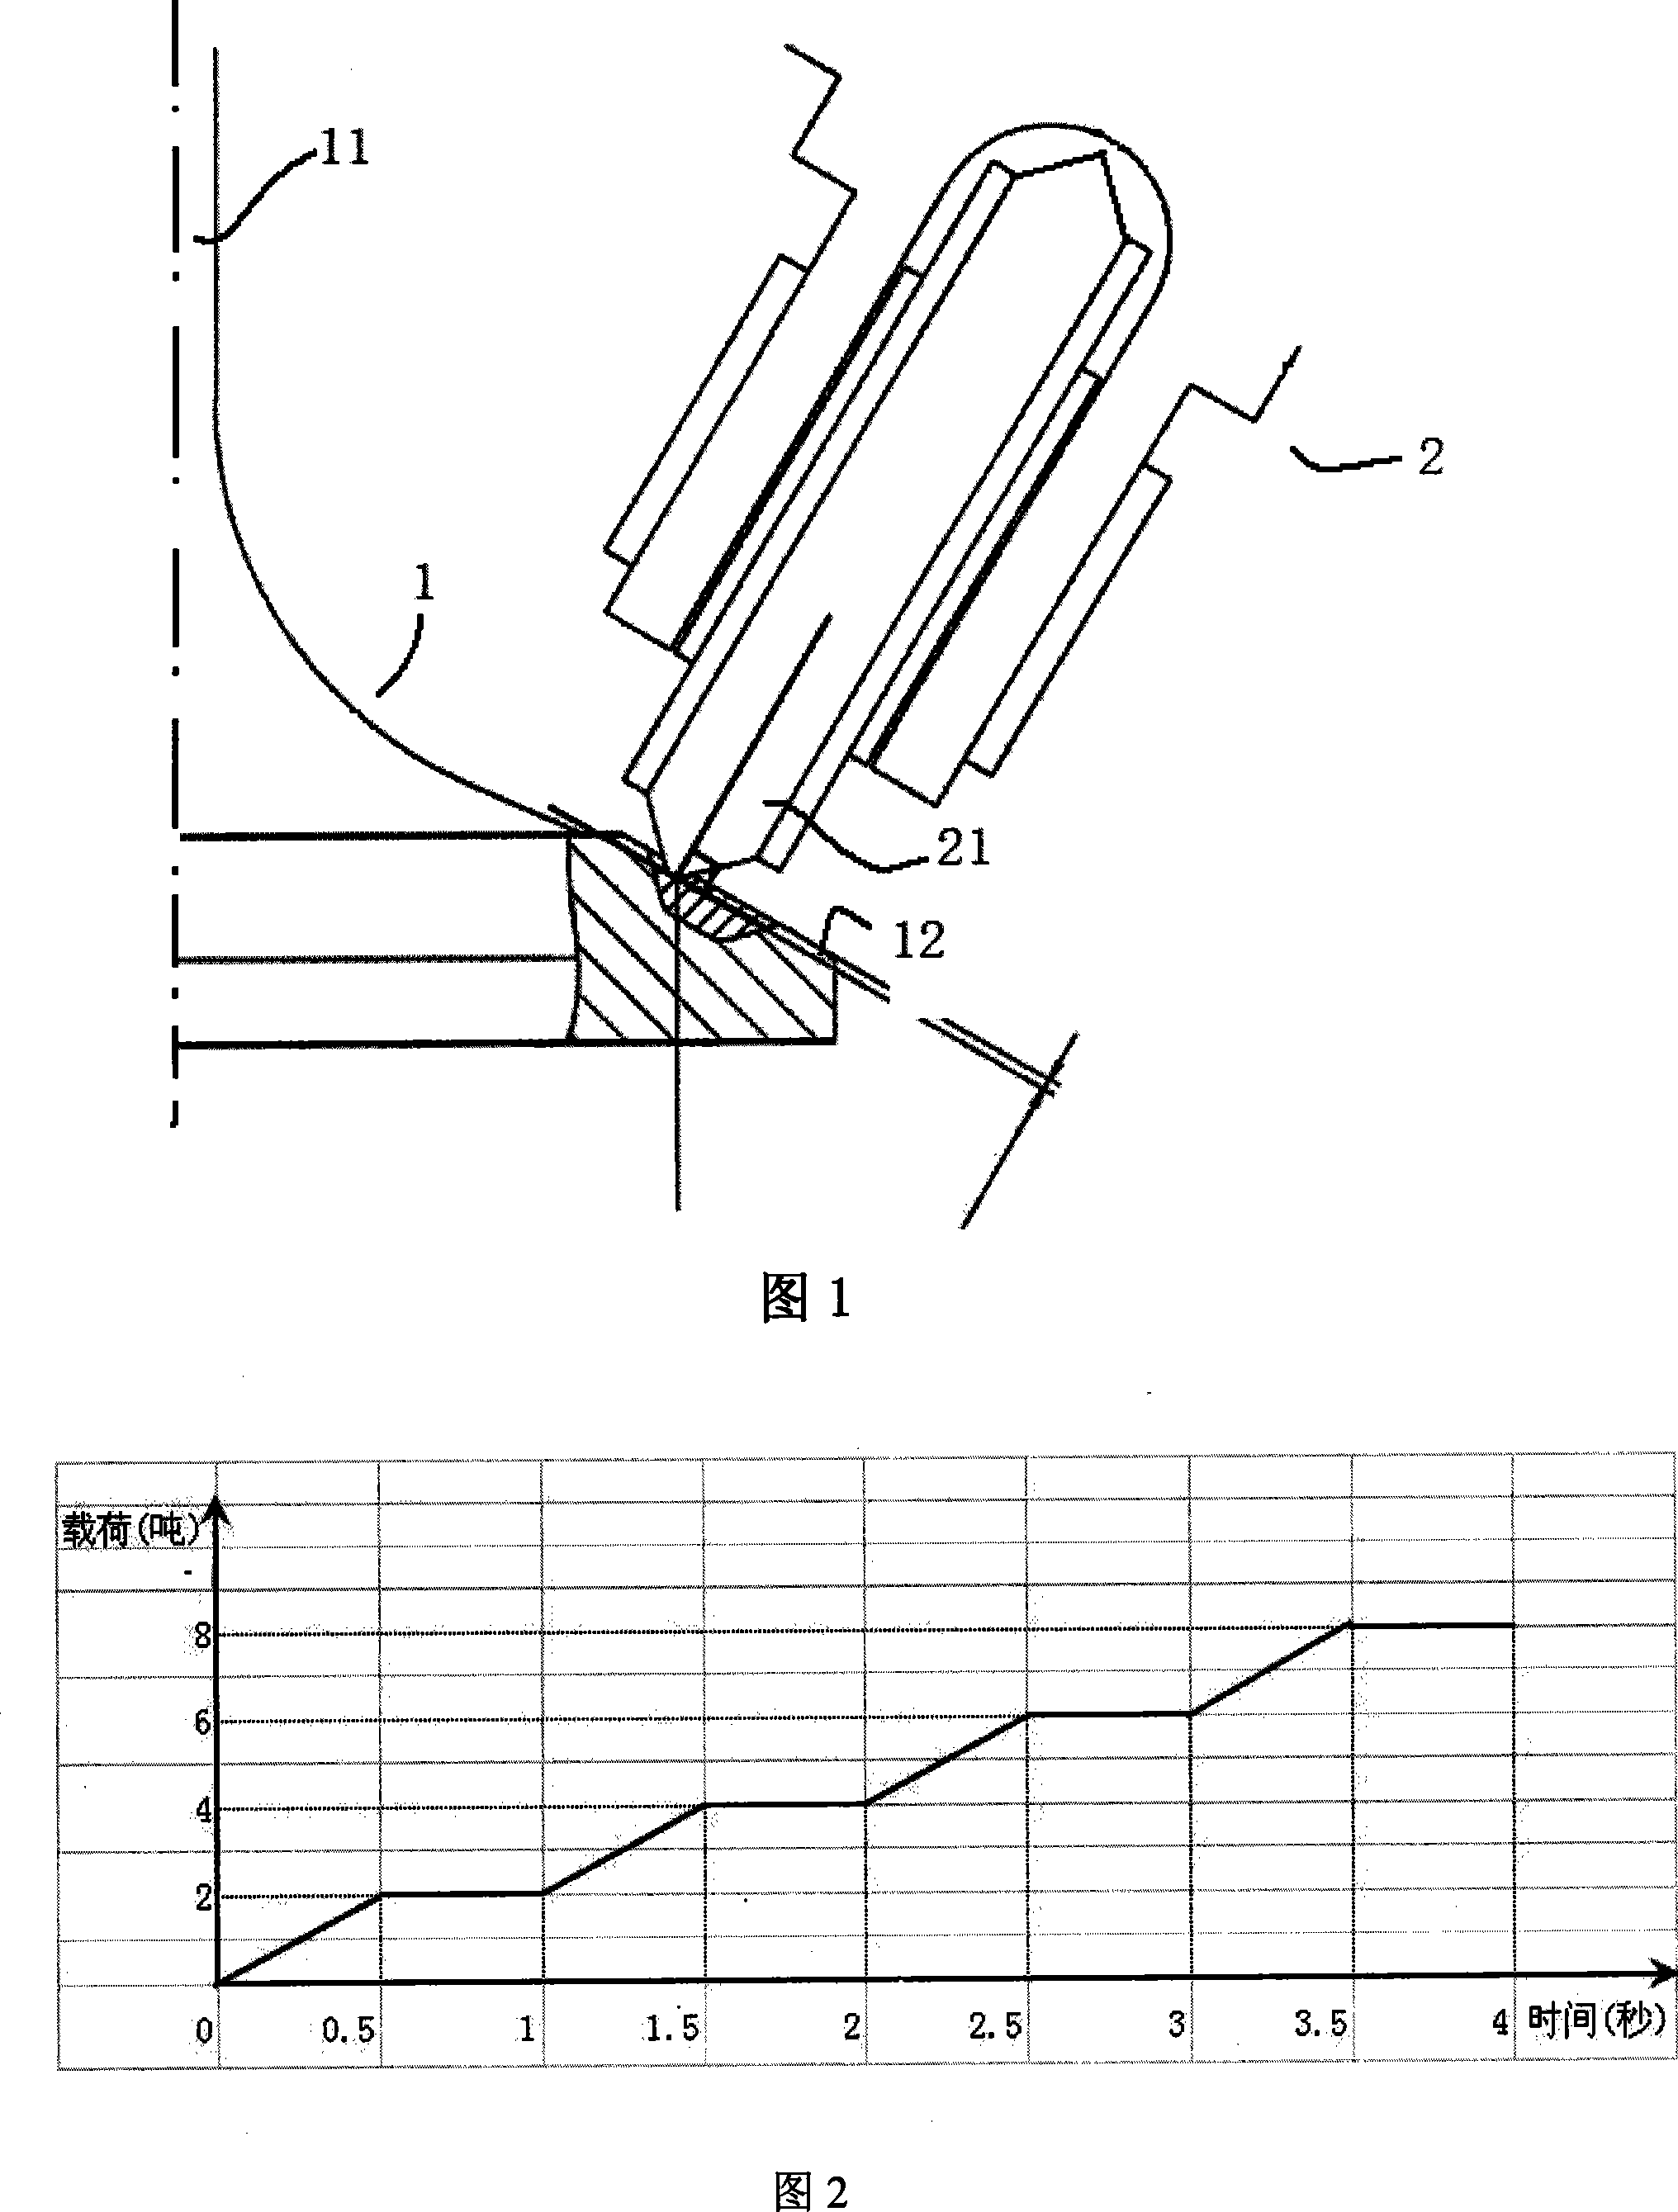 Rolling method for exhaust valve surface